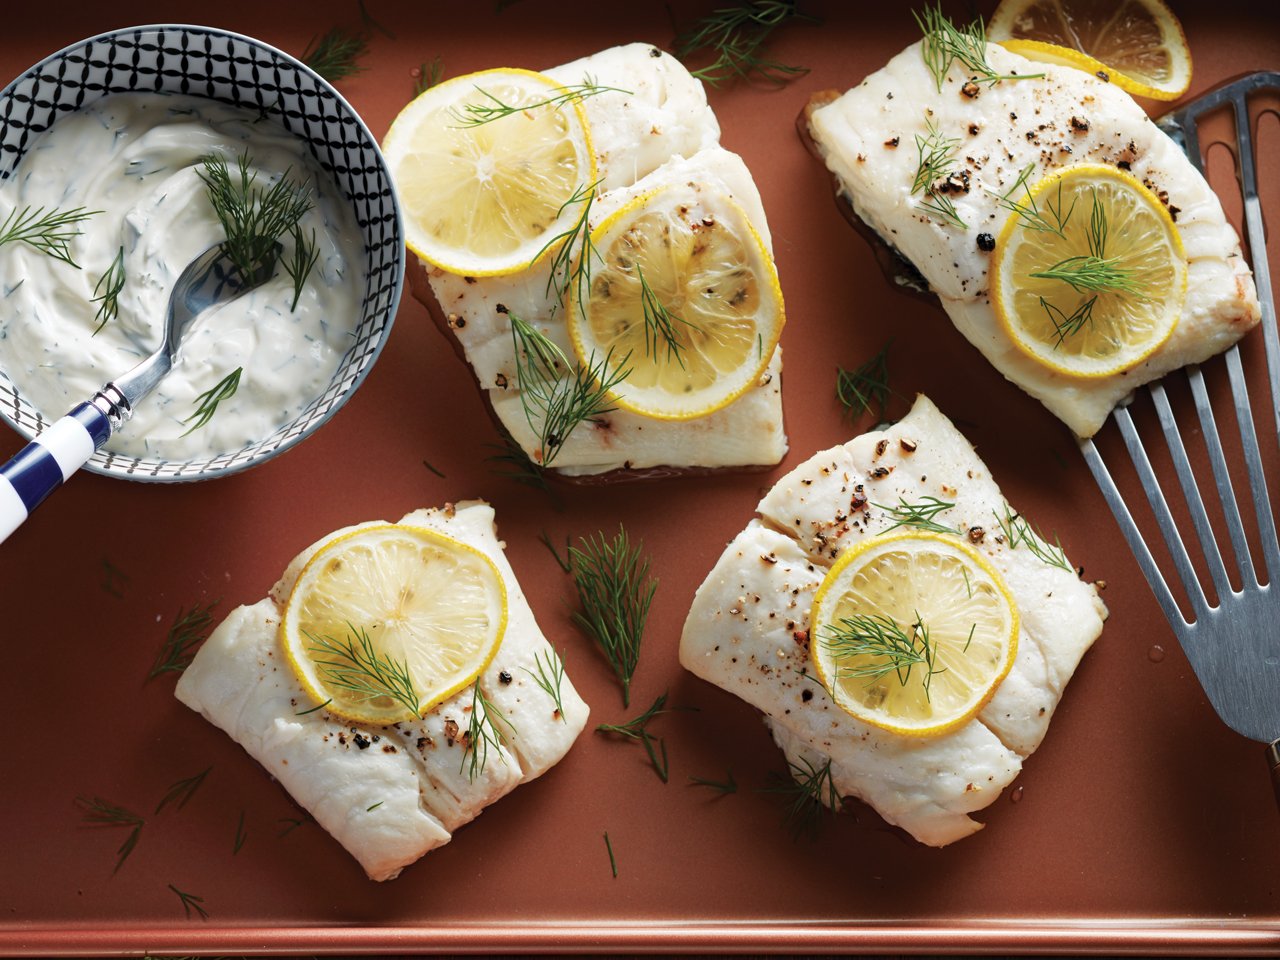 Roasted Fish with Creamy Dill Sauce